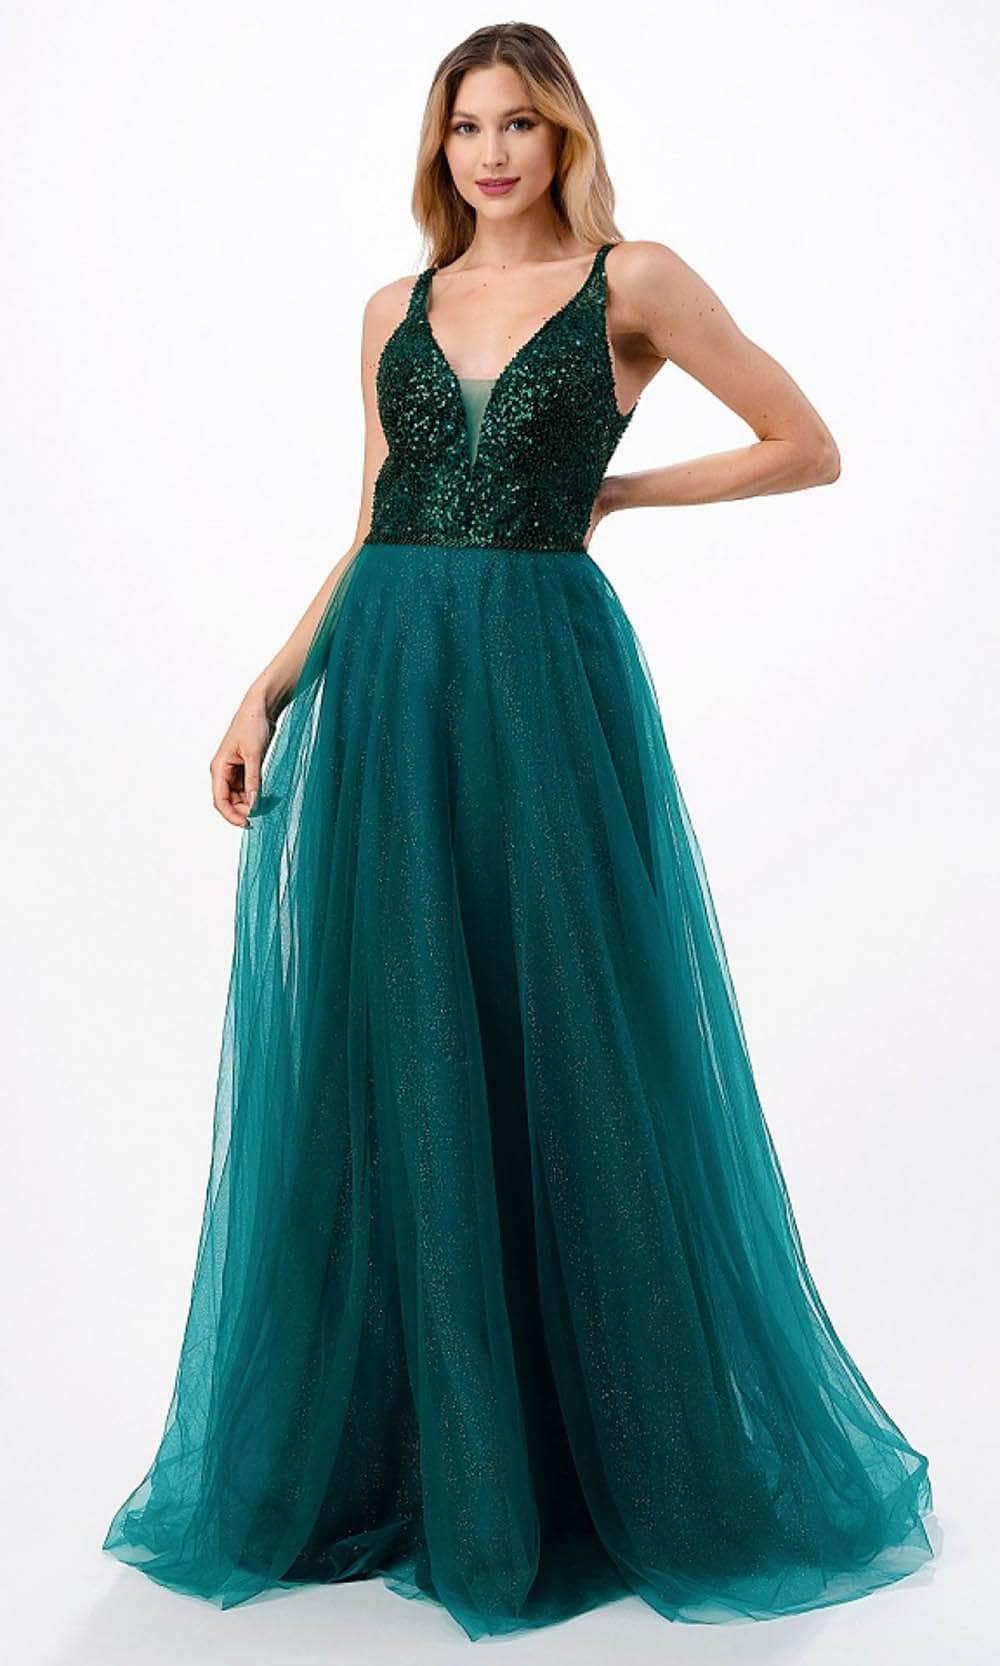 Aspeed Design L2684 - Bead Embellished Open Back Evening Gown
